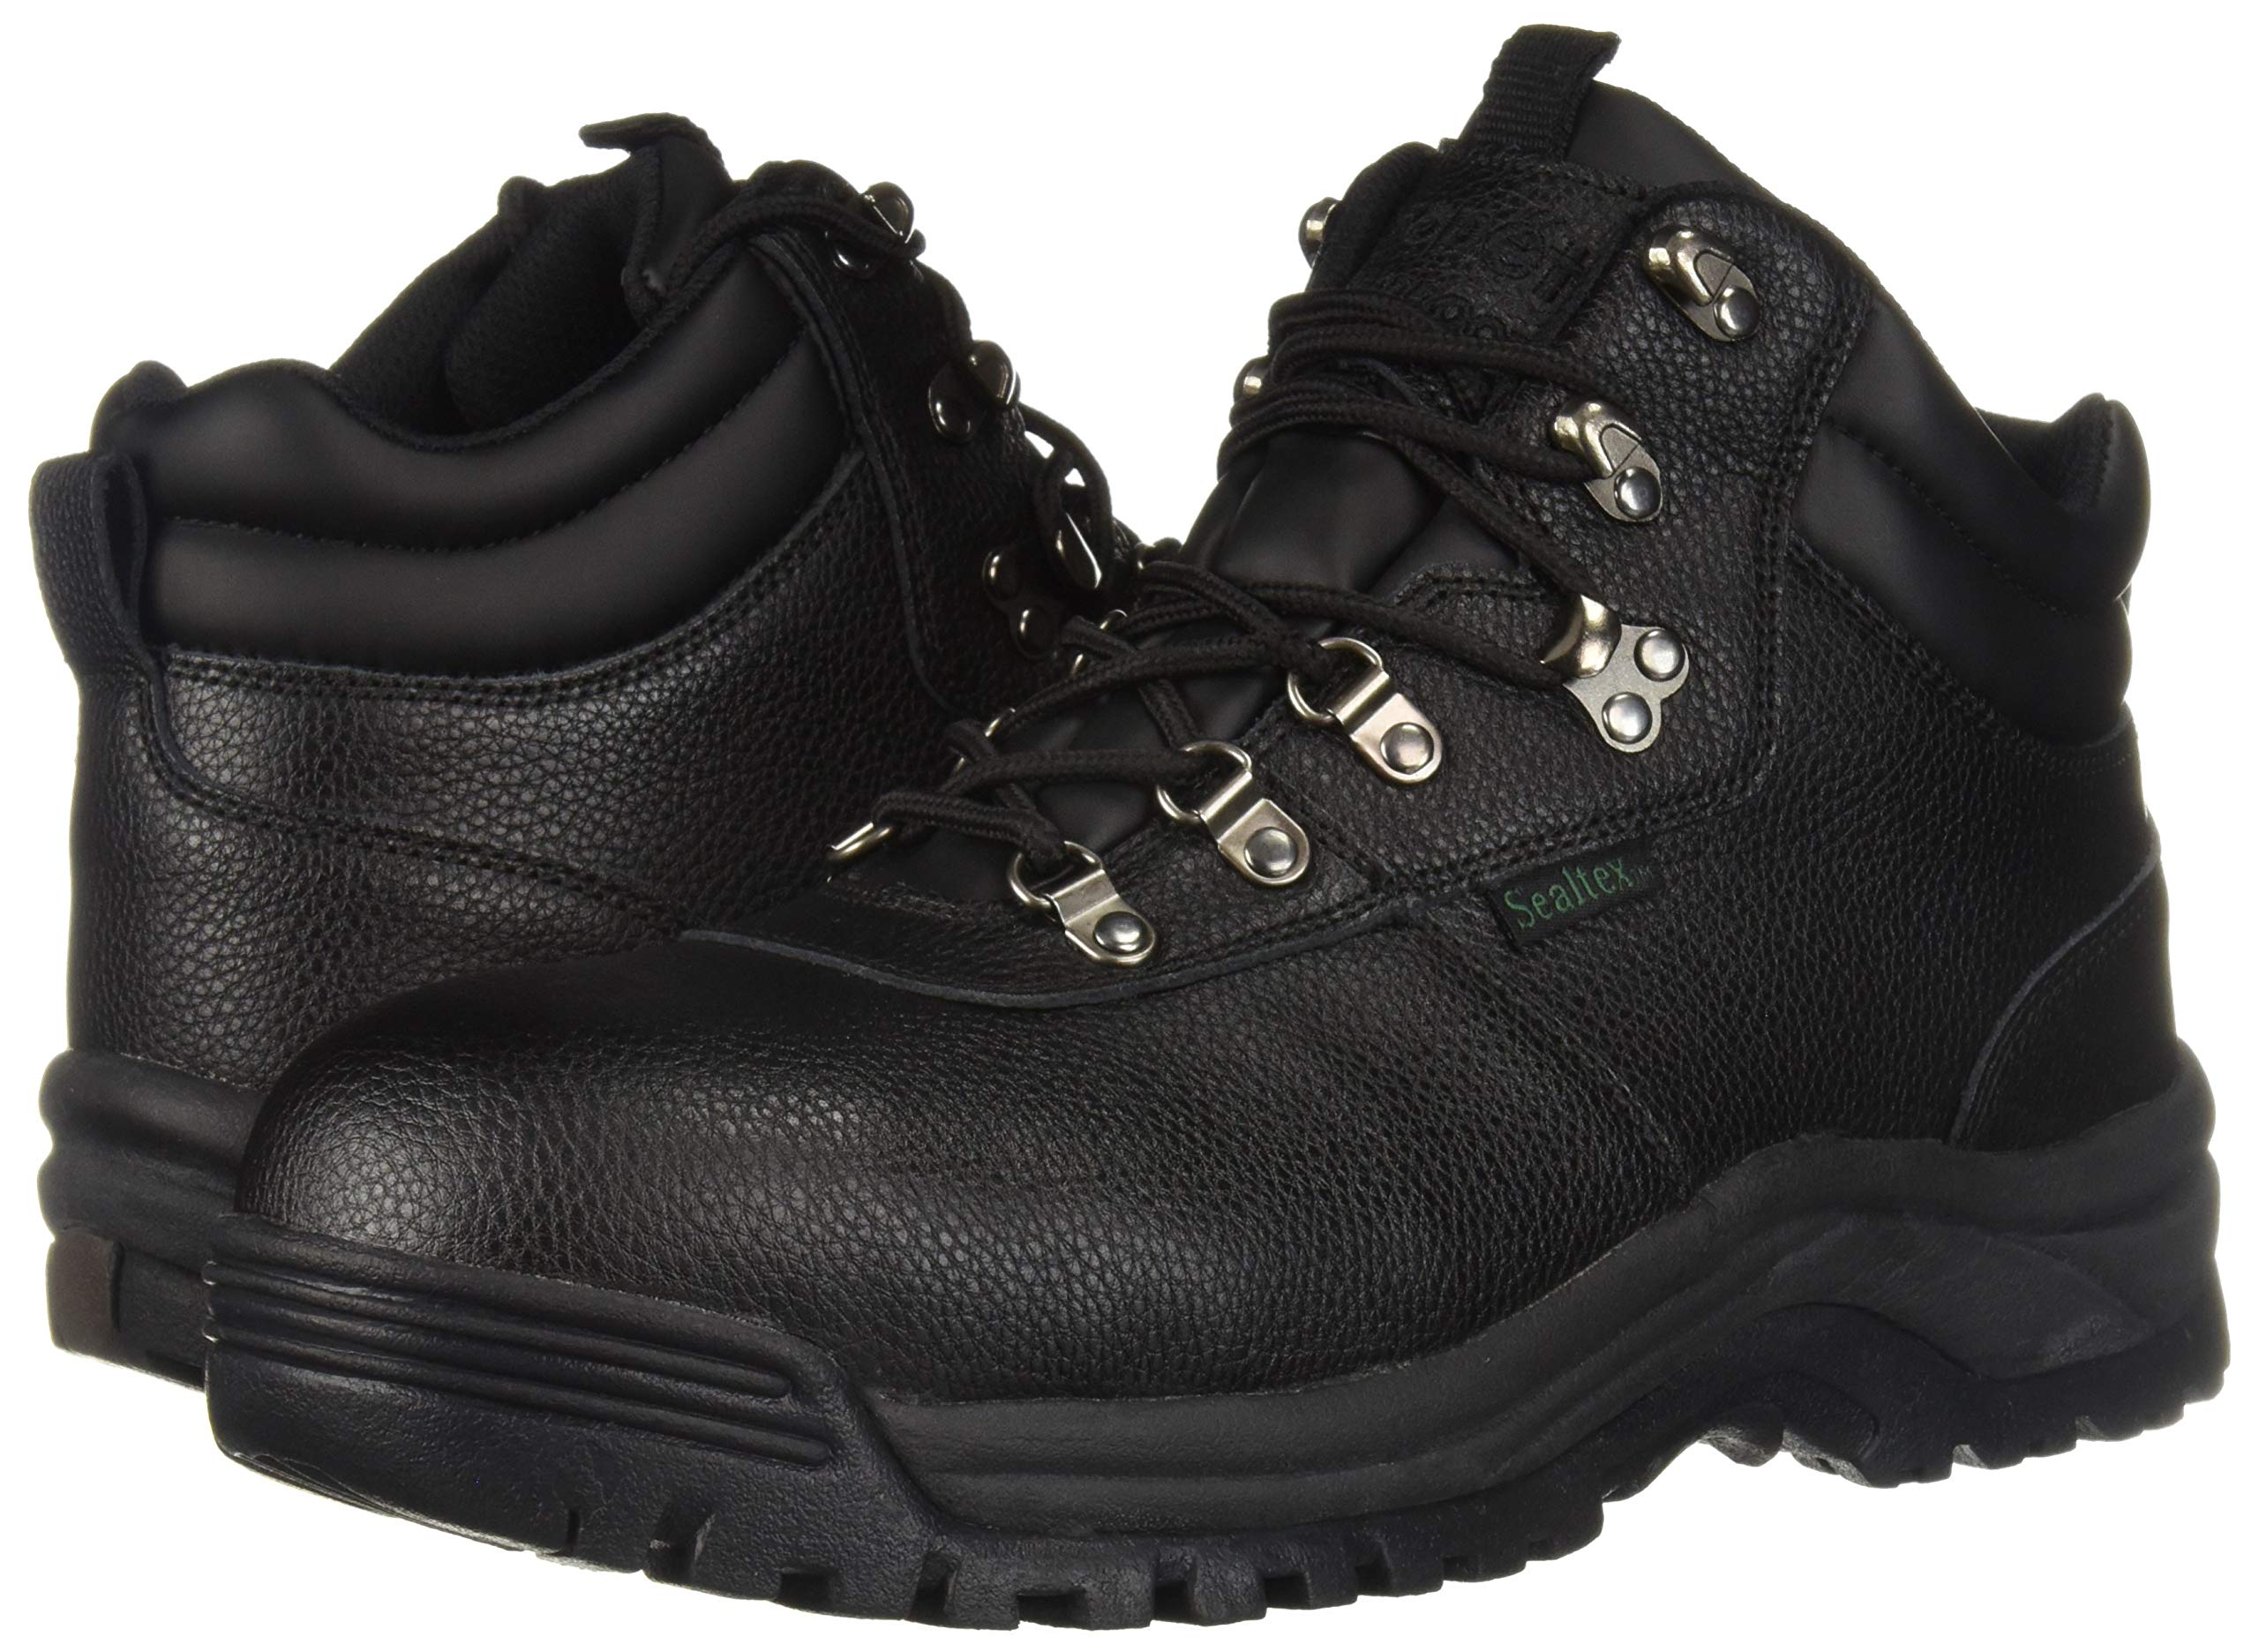 Propet Mens Shield Walker 6 Inch Waterproof Composite Toe Work Safety Shoes Casual - Black